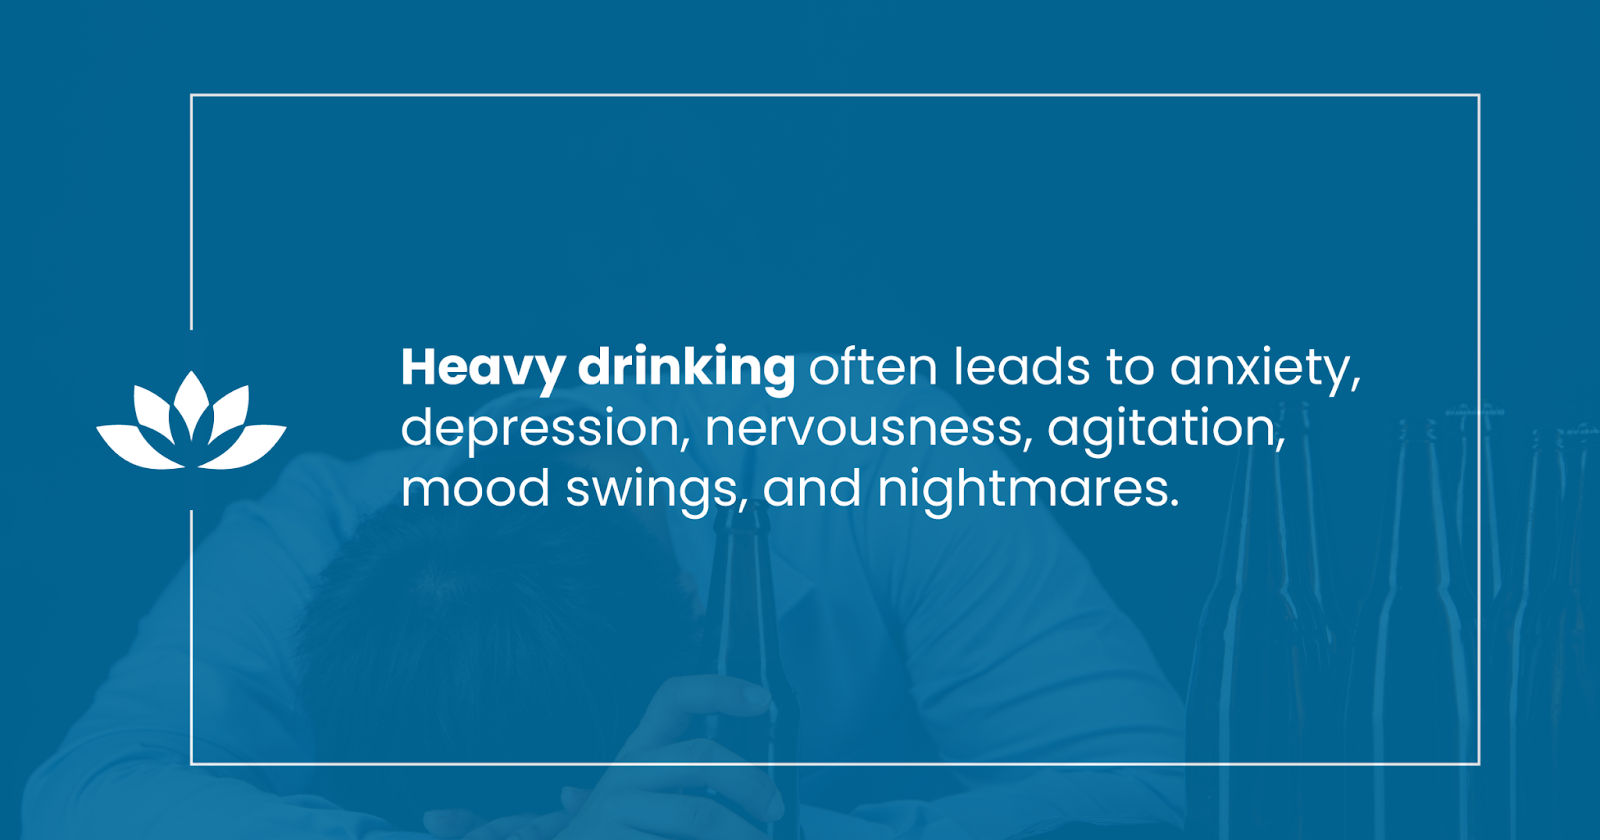 heavy drinking often leads to anxiety depression and nightmares